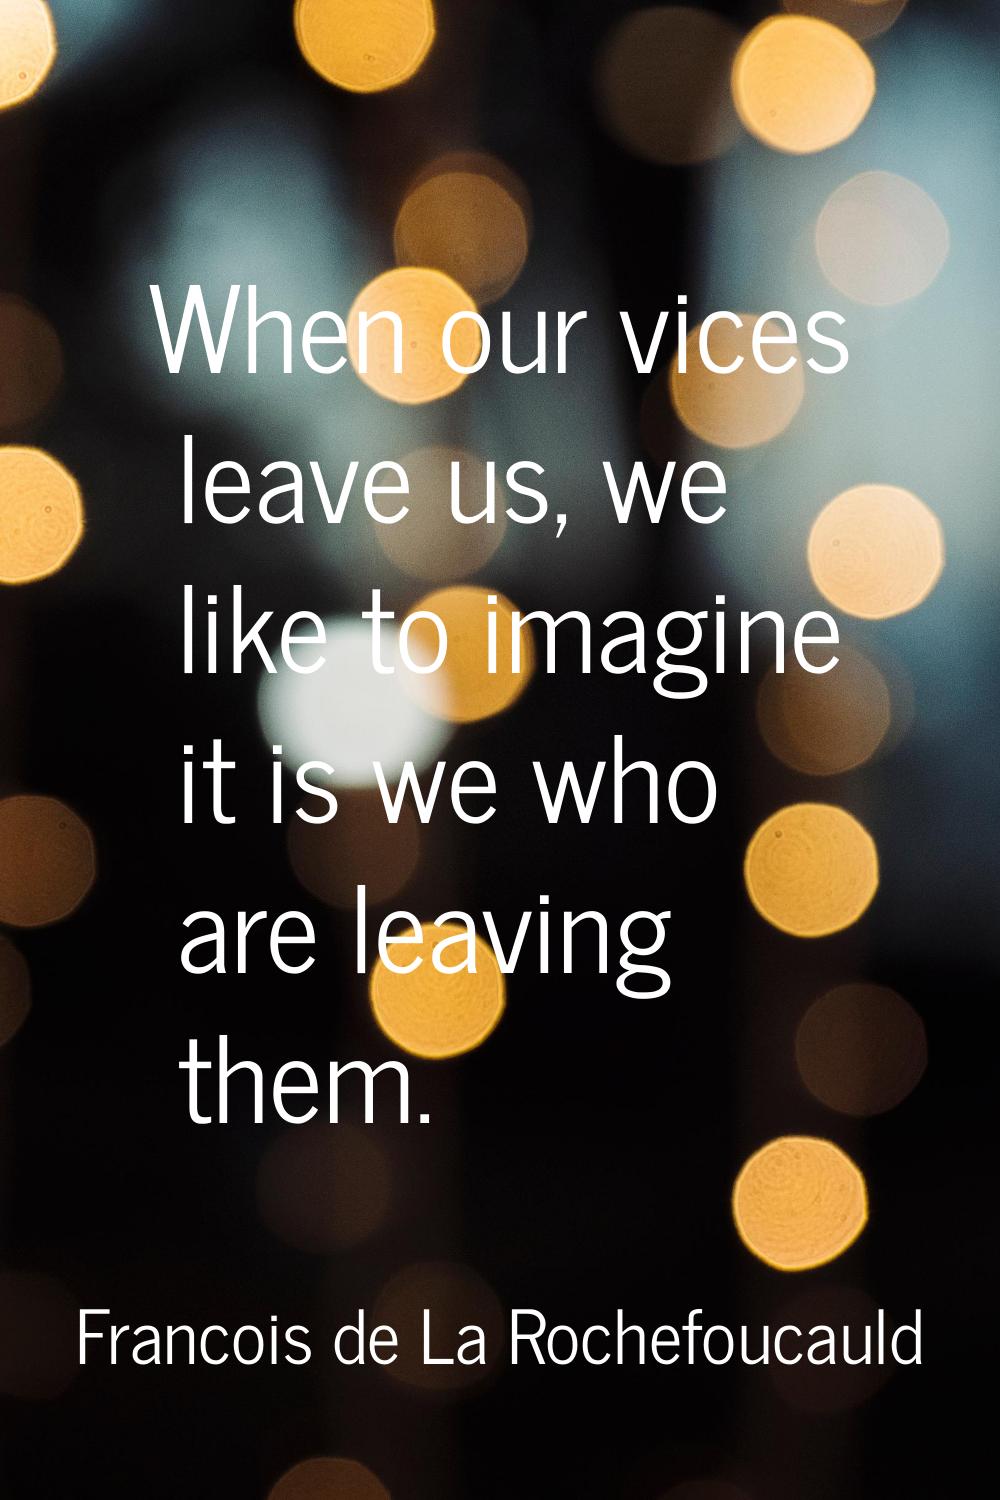 When our vices leave us, we like to imagine it is we who are leaving them.